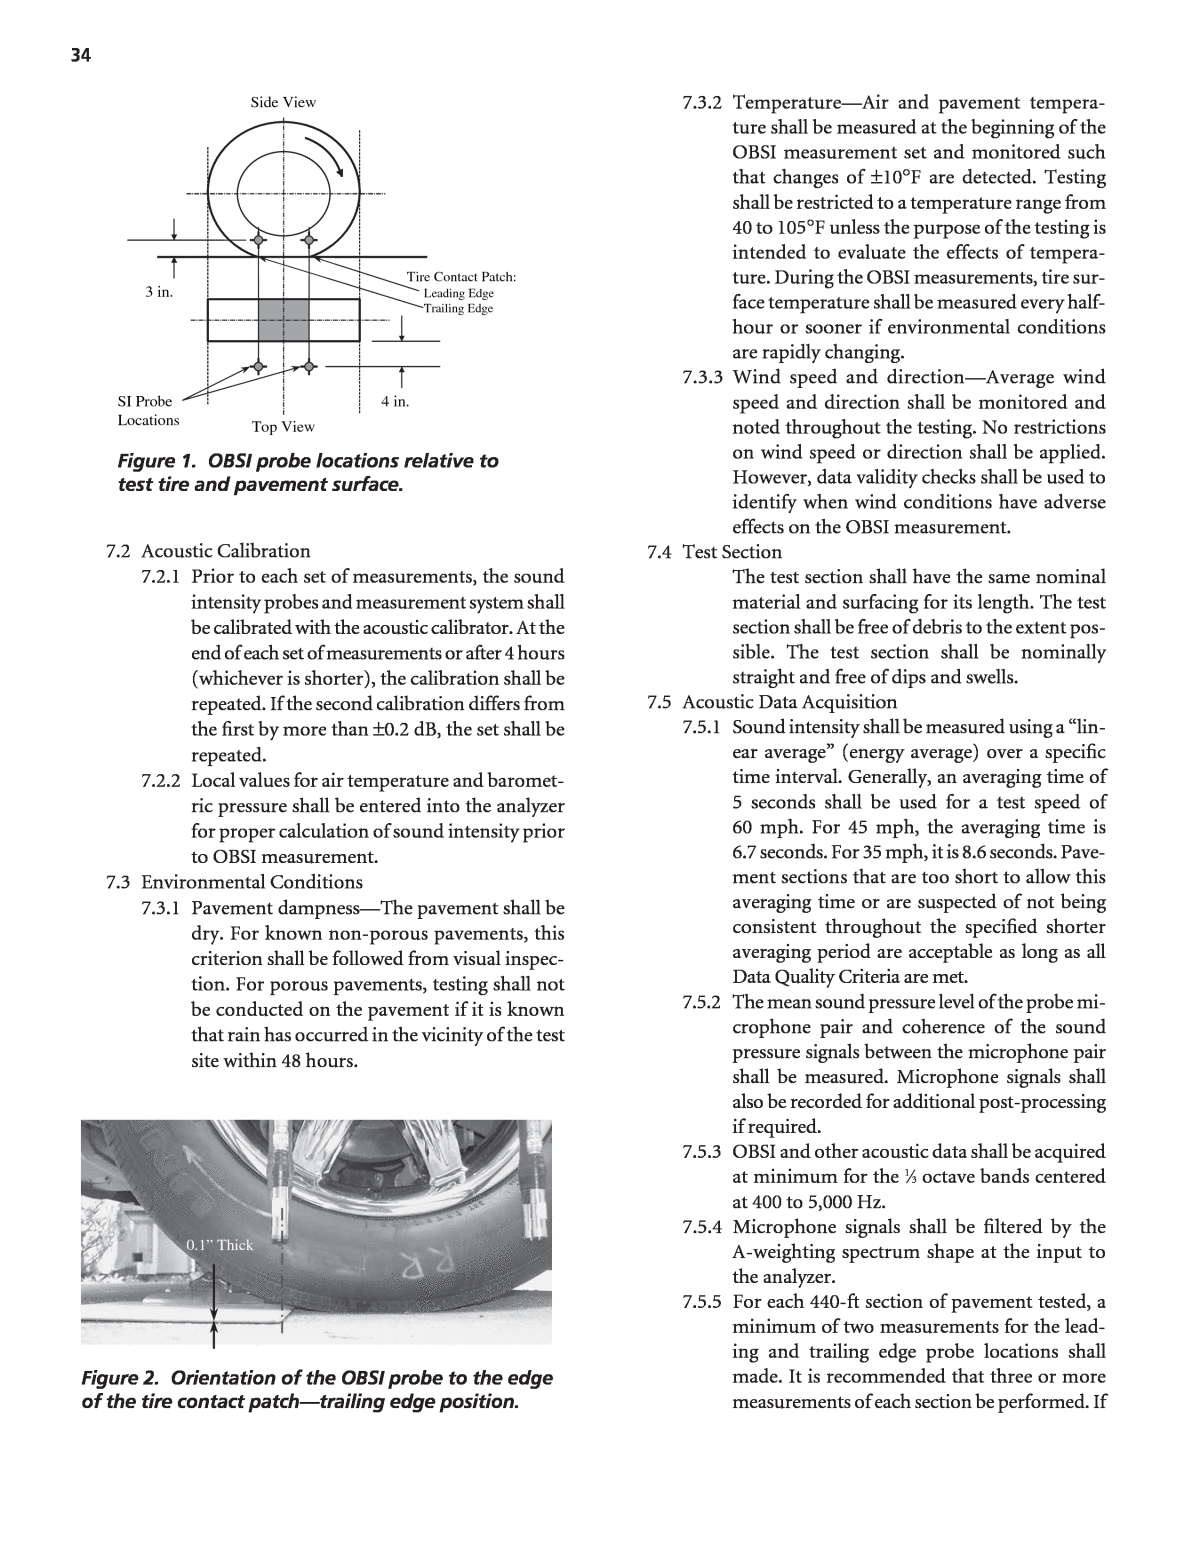 chapter 1 - Trailing-Edge